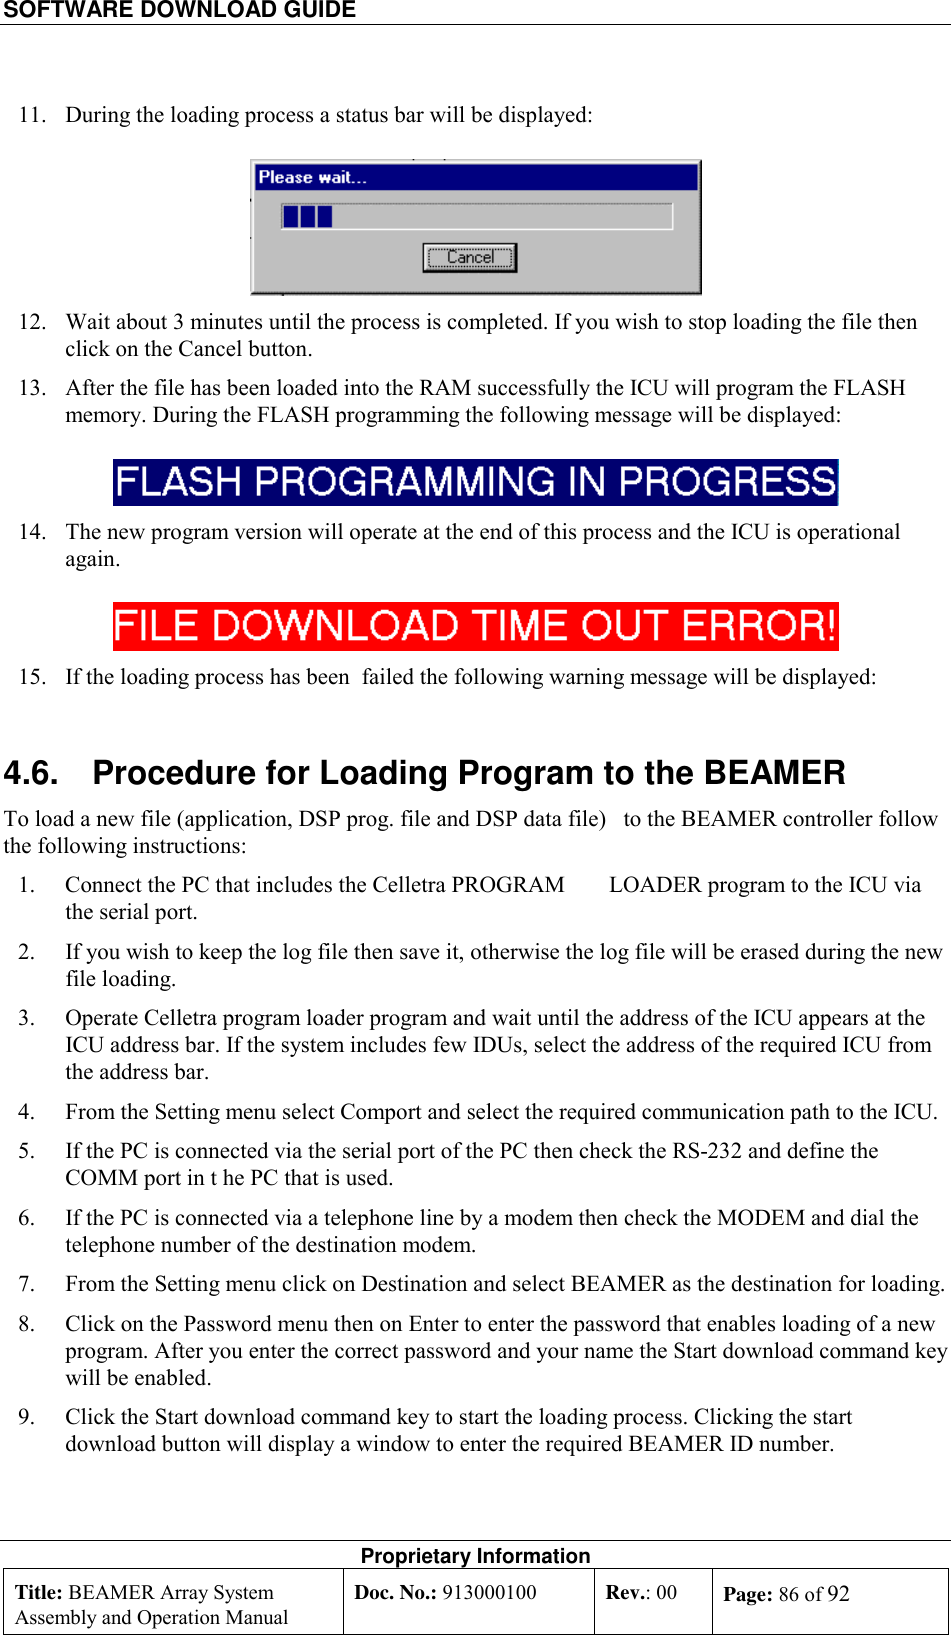 SOFTWARE DOWNLOAD GUIDE    Proprietary Information Title: BEAMER Array System Assembly and Operation Manual Doc. No.: 913000100  Rev.: 00  Page: 86 of 92  11.  During the loading process a status bar will be displayed:  12.  Wait about 3 minutes until the process is completed. If you wish to stop loading the file then click on the Cancel button. 13.  After the file has been loaded into the RAM successfully the ICU will program the FLASH memory. During the FLASH programming the following message will be displayed:   14.  The new program version will operate at the end of this process and the ICU is operational again.  15.  If the loading process has been  failed the following warning message will be displayed: 4.6.  Procedure for Loading Program to the BEAMER To load a new file (application, DSP prog. file and DSP data file)   to the BEAMER controller follow the following instructions: 1.  Connect the PC that includes the Celletra PROGRAM   LOADER program to the ICU via the serial port. 2.  If you wish to keep the log file then save it, otherwise the log file will be erased during the new file loading.  3.  Operate Celletra program loader program and wait until the address of the ICU appears at the ICU address bar. If the system includes few IDUs, select the address of the required ICU from the address bar. 4.  From the Setting menu select Comport and select the required communication path to the ICU.  5.  If the PC is connected via the serial port of the PC then check the RS-232 and define the COMM port in t he PC that is used. 6.  If the PC is connected via a telephone line by a modem then check the MODEM and dial the telephone number of the destination modem. 7.  From the Setting menu click on Destination and select BEAMER as the destination for loading.  8.  Click on the Password menu then on Enter to enter the password that enables loading of a new program. After you enter the correct password and your name the Start download command key will be enabled. 9.  Click the Start download command key to start the loading process. Clicking the start download button will display a window to enter the required BEAMER ID number. 